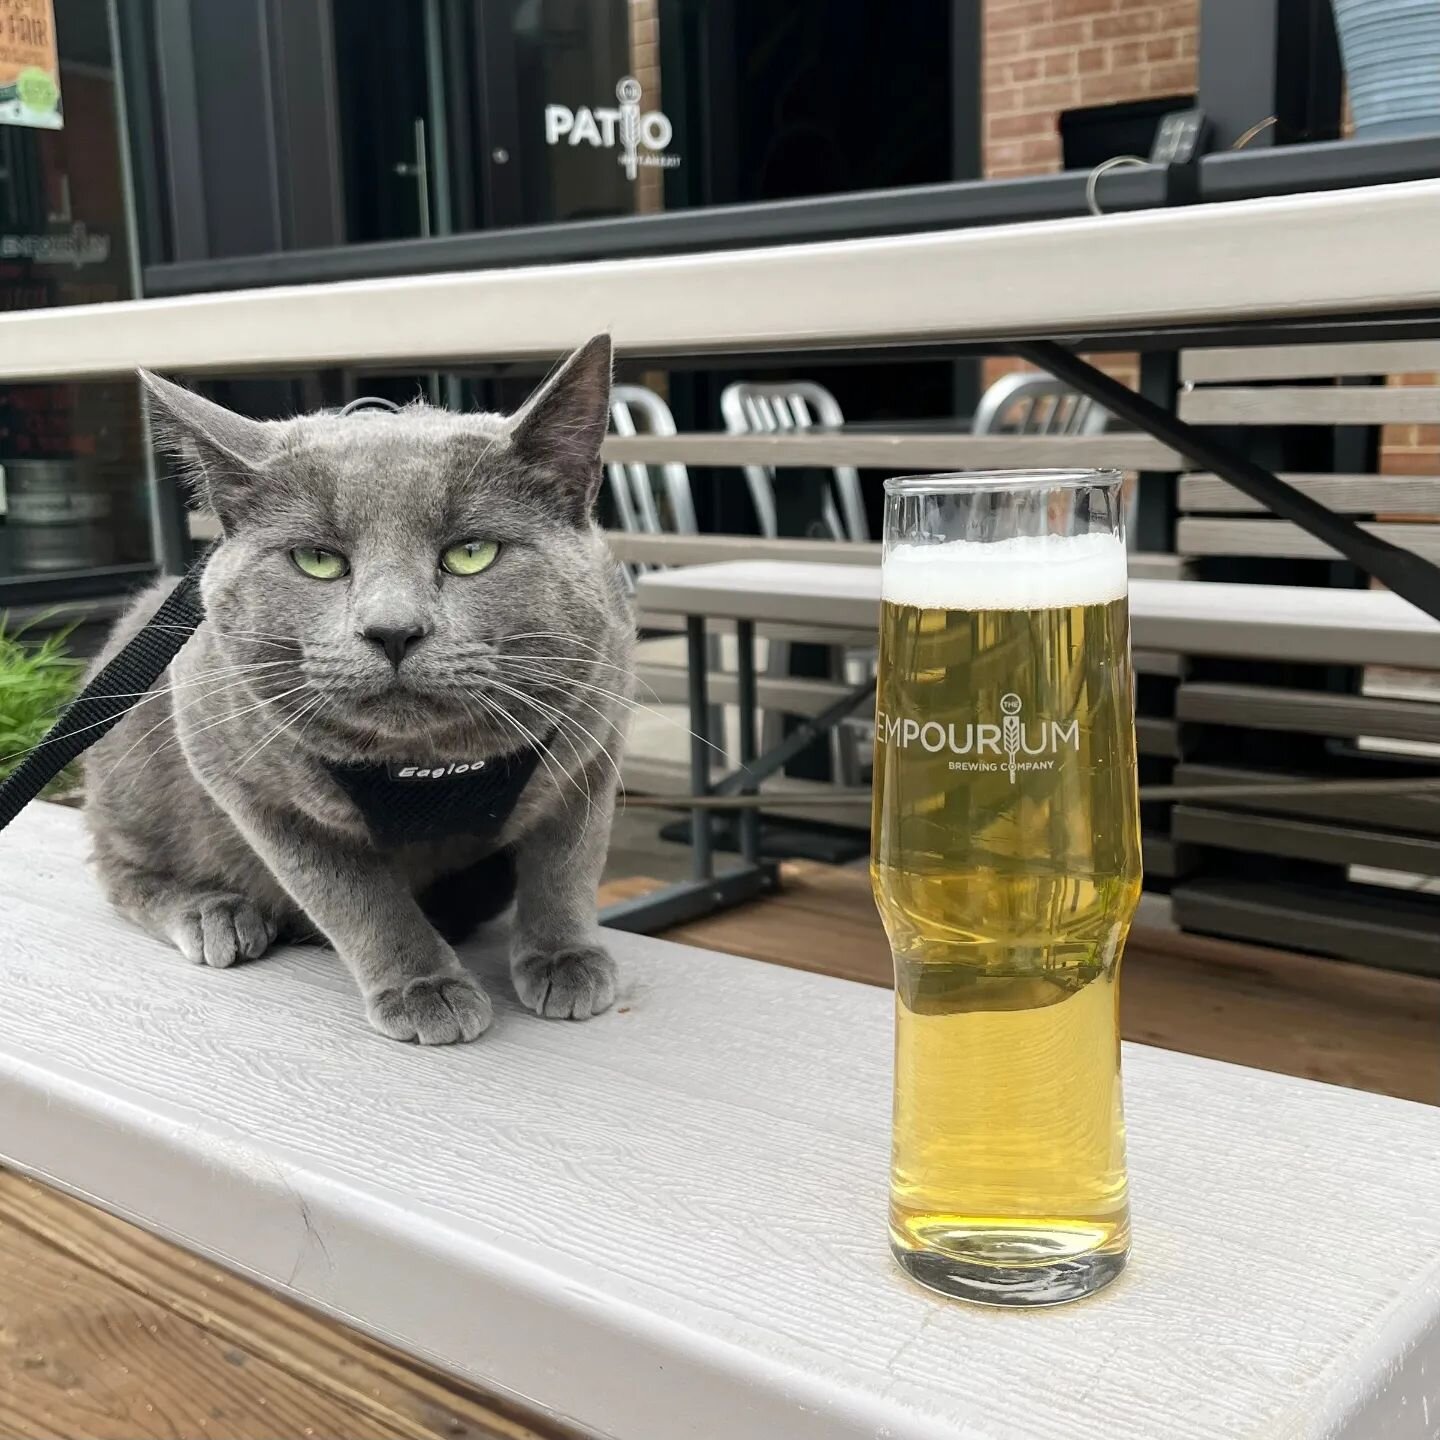 Coming to a brewery near you (specifically @empouriumbrew): adoptable cats, merch, food and most importantly beer for a cause! The Empourium will be hosting the next fundraiser for our partner rescue @denvercatrescue this Sunday, May 21st!

If you ca